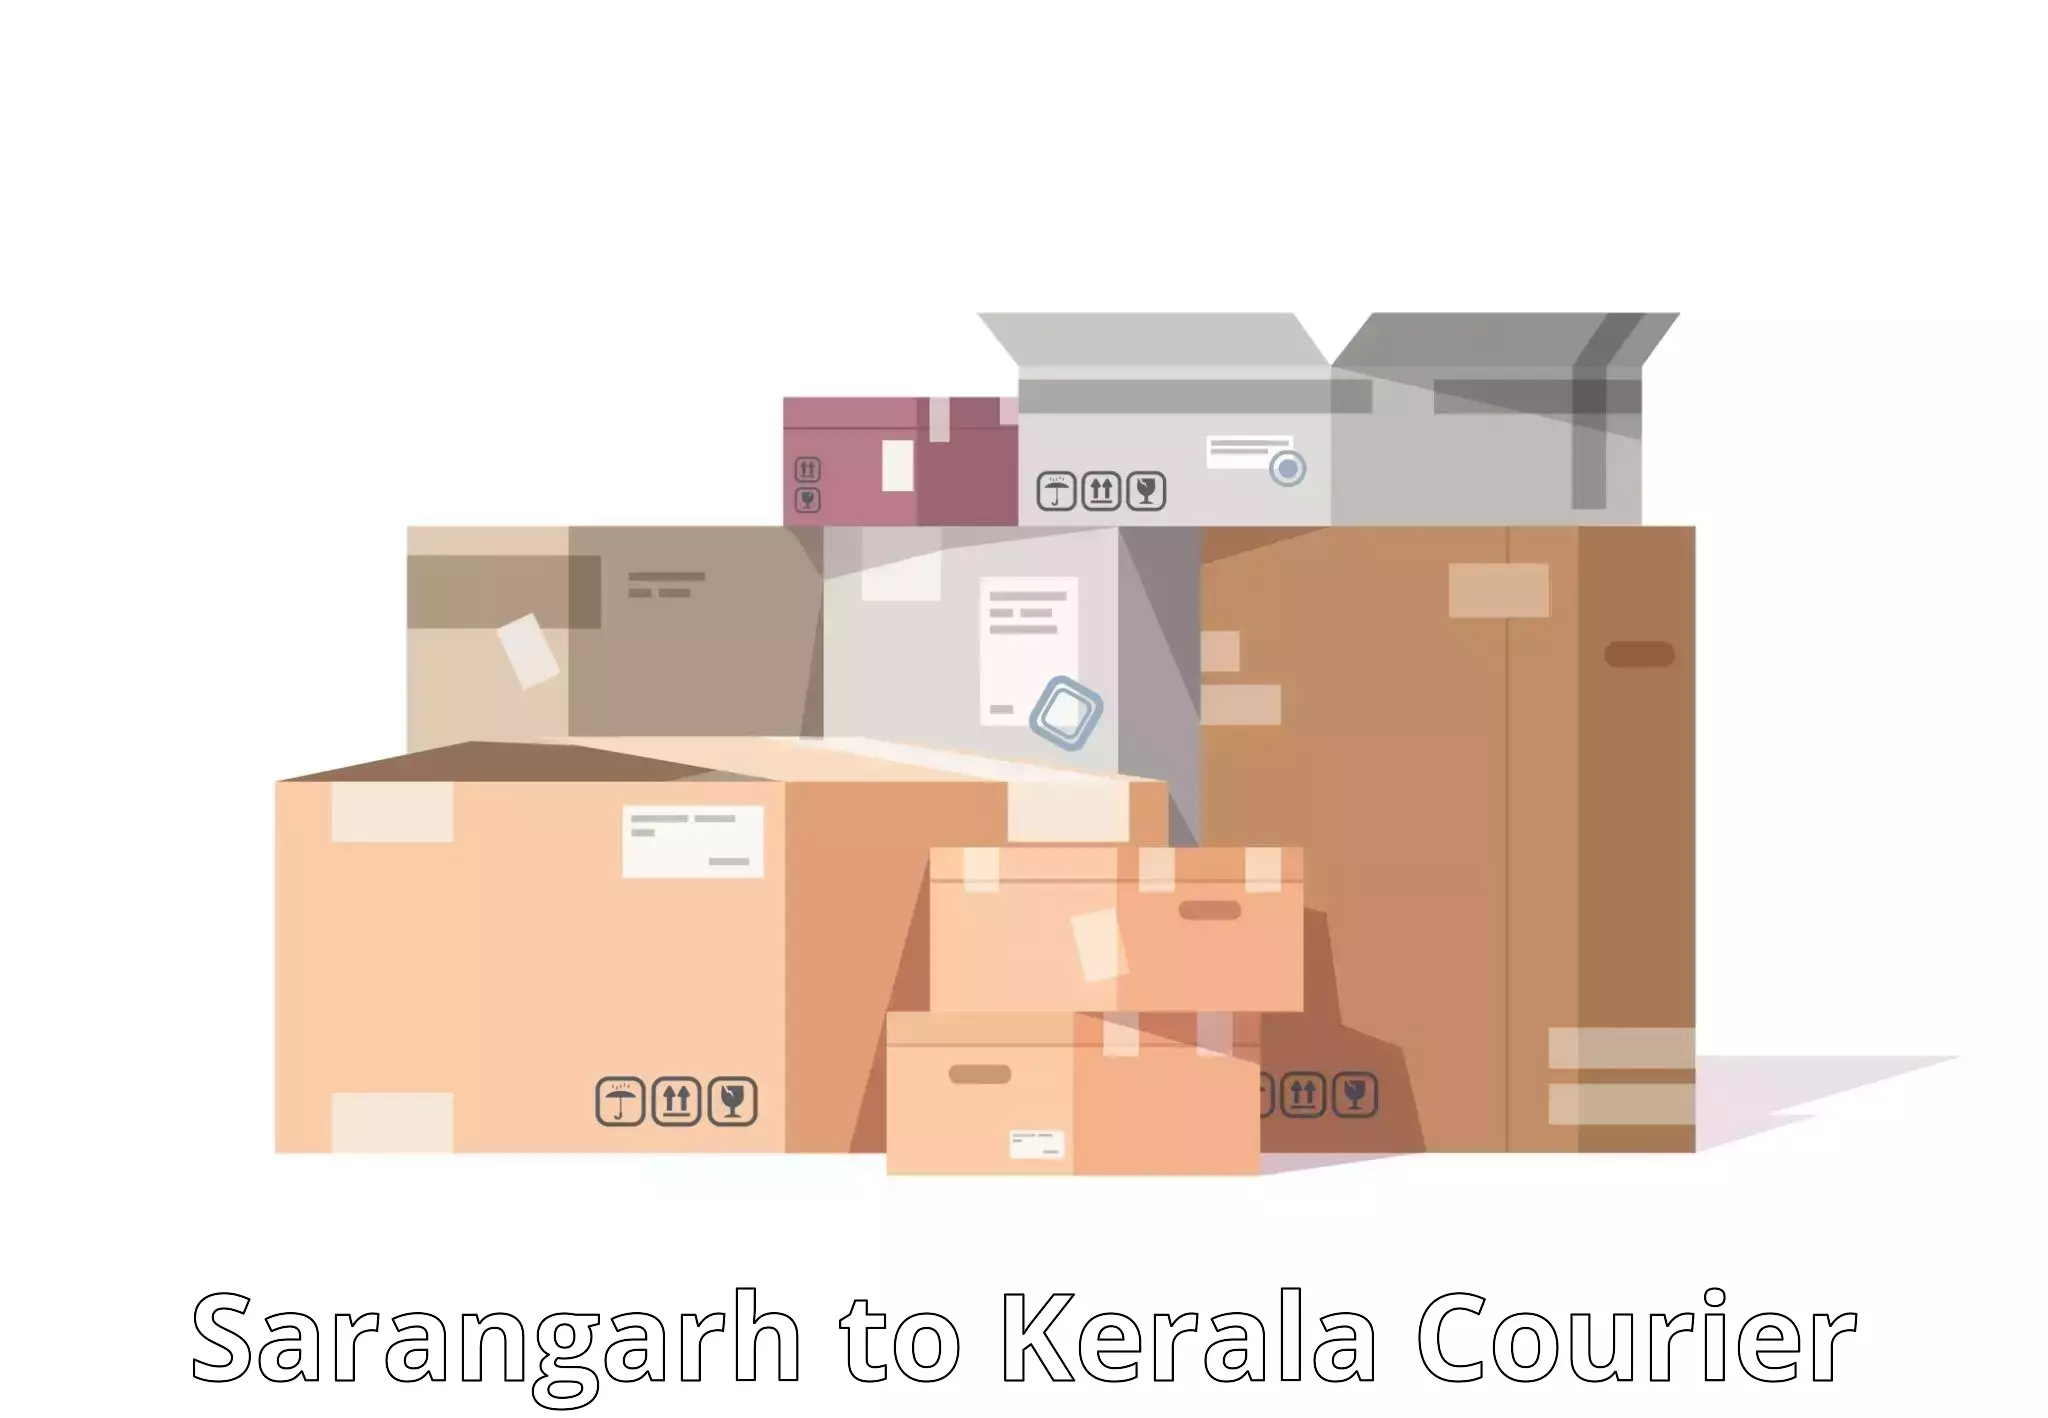 Parcel service for businesses Sarangarh to Kerala